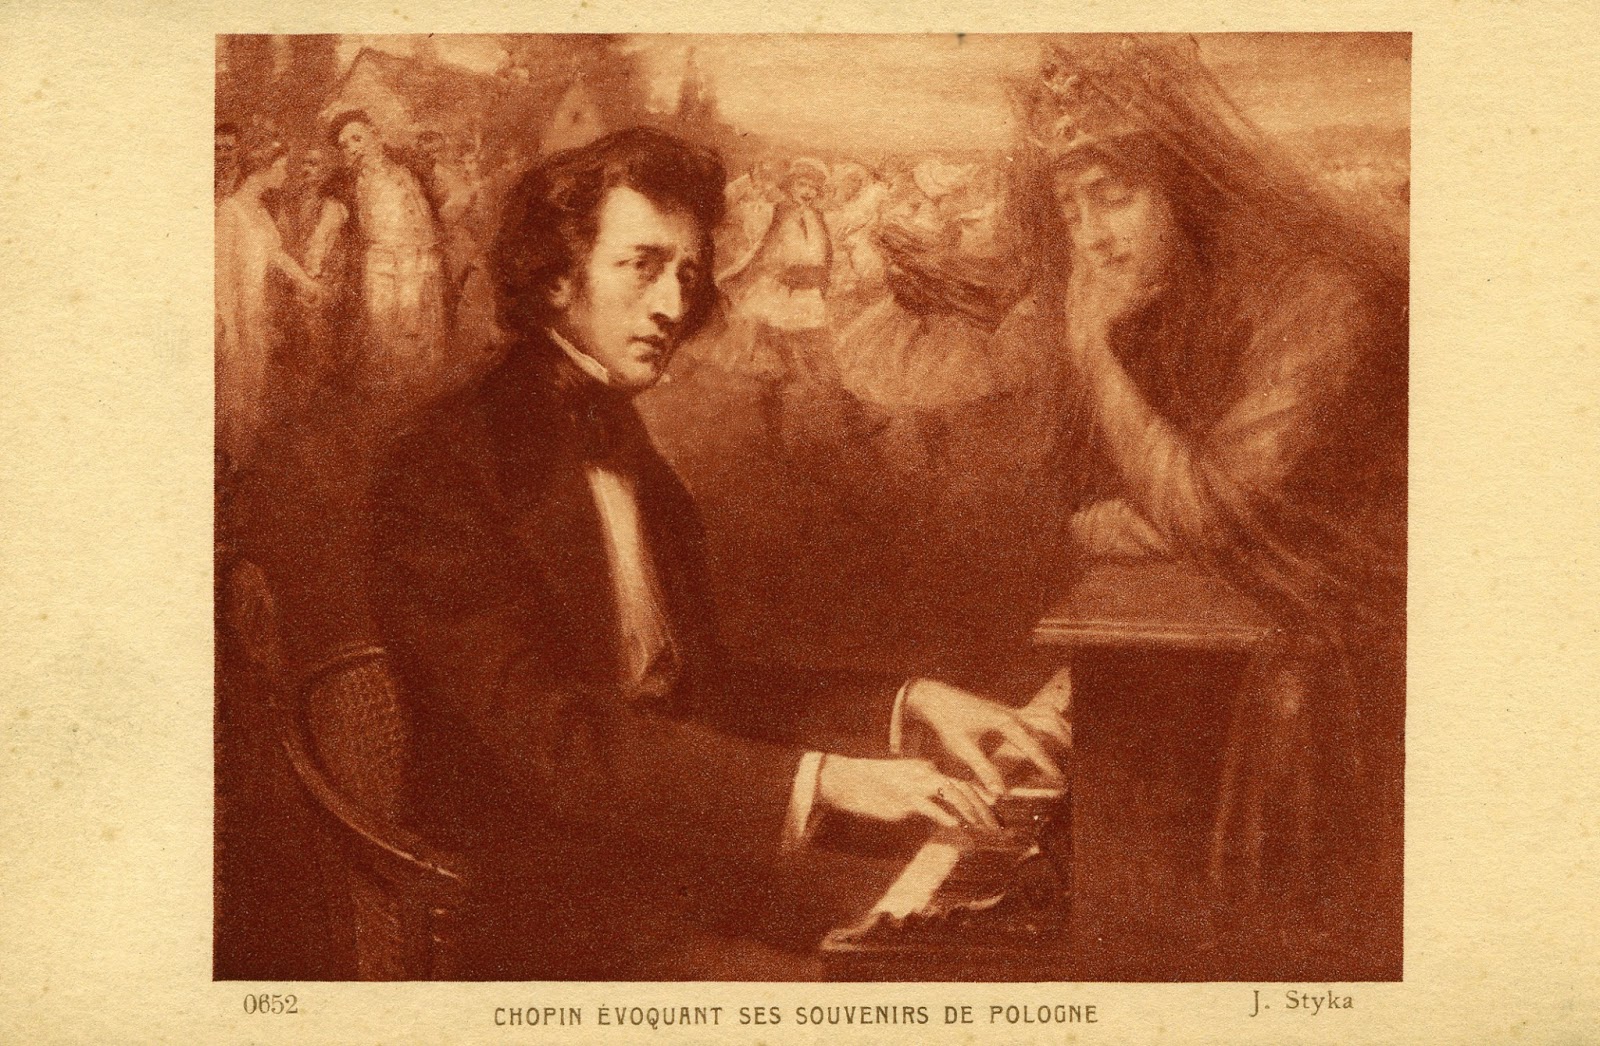 chopin expressed his love of poland by composing polonaises and